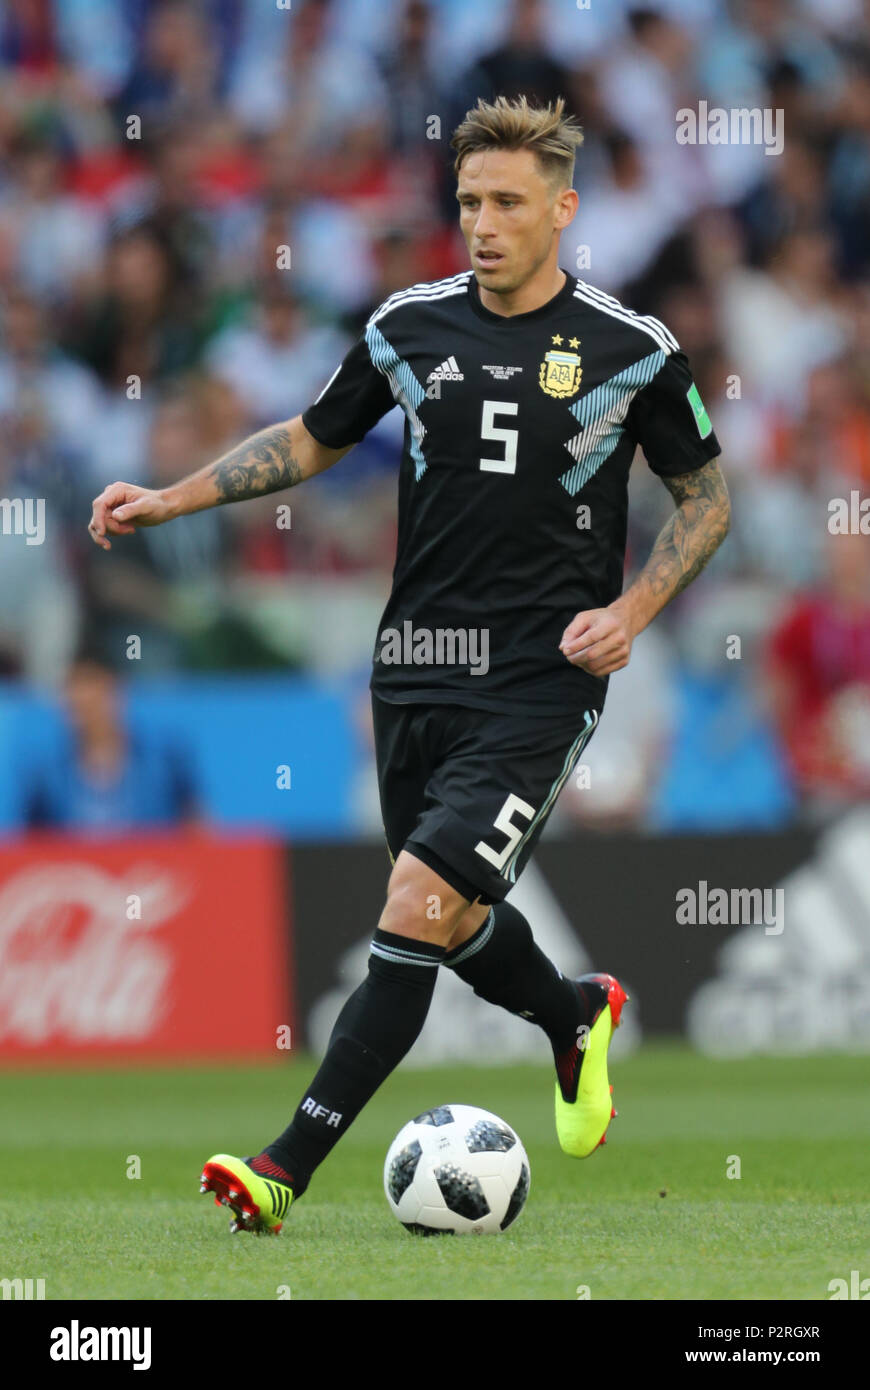 Lucas Biglia  ARGENTINA  ARGENTINA V ICELAND , 2018 FIFA WORLD CUP RUSSIA  16 June 2018  GBC8150  Argentina v Iceland  2018 FIFA World Cup Russia Spartak Stadium Moscow    STRICTLY EDITORIAL USE ONLY.   If The Player/Players Depicted In This Image Is/Are Playing For An English Club Or The England National Team.   Then This Image May Only Be Used For Editorial Purposes. No Commercial Use.    The Following Usages Are Also Restricted EVEN IF IN AN EDITORIAL CONTEXT:   Use in conjuction with, or part of, any unauthorized audio, video, data, fixture lists, club/league logos, Betting, Games or any ' Stock Photo